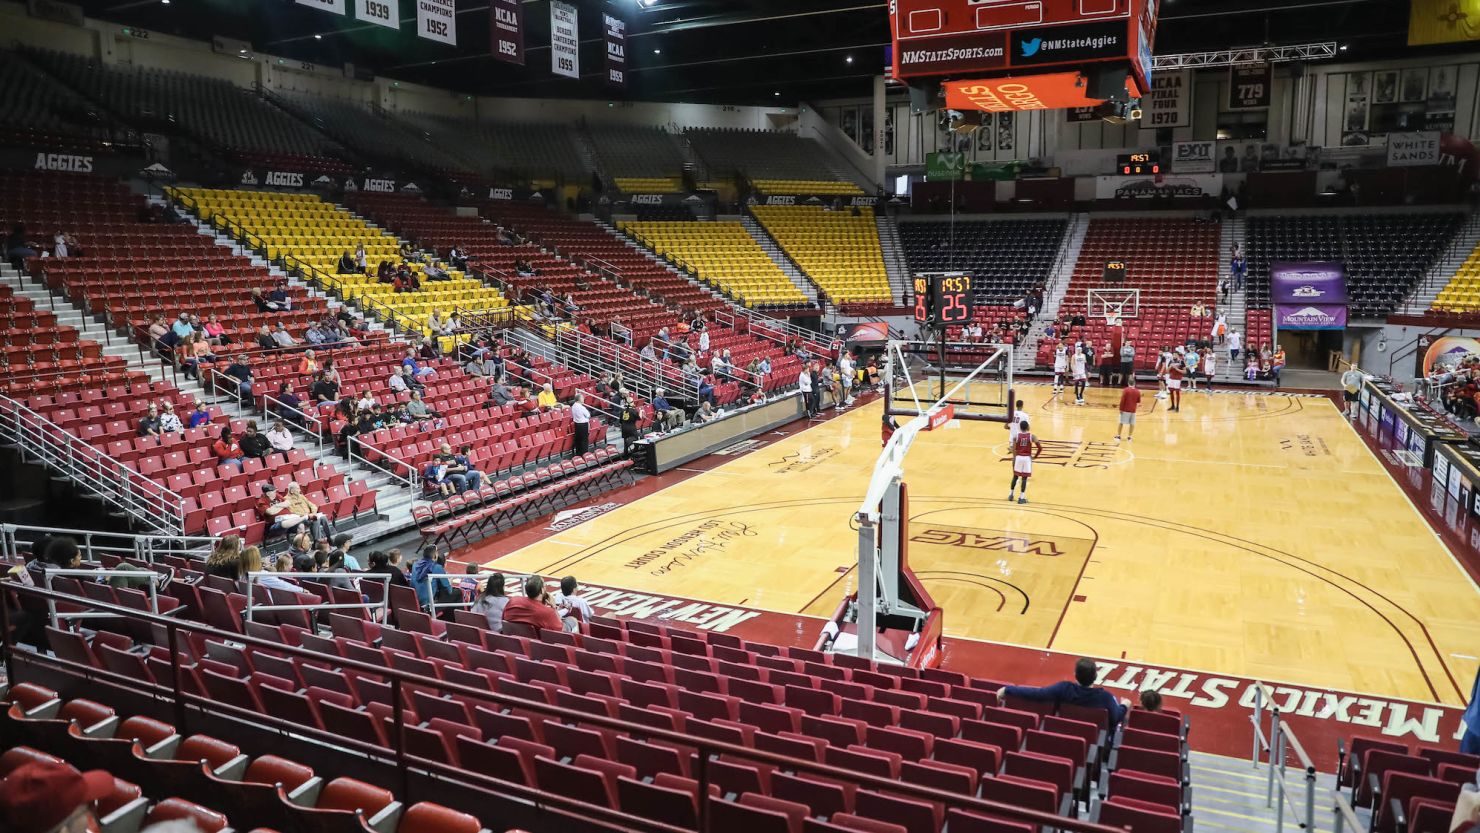 The NMSU men's basketball team, seen here practicing at the Pan American Center in Las Cruces in 2019, has been suspended "until further notice," according to the university. 